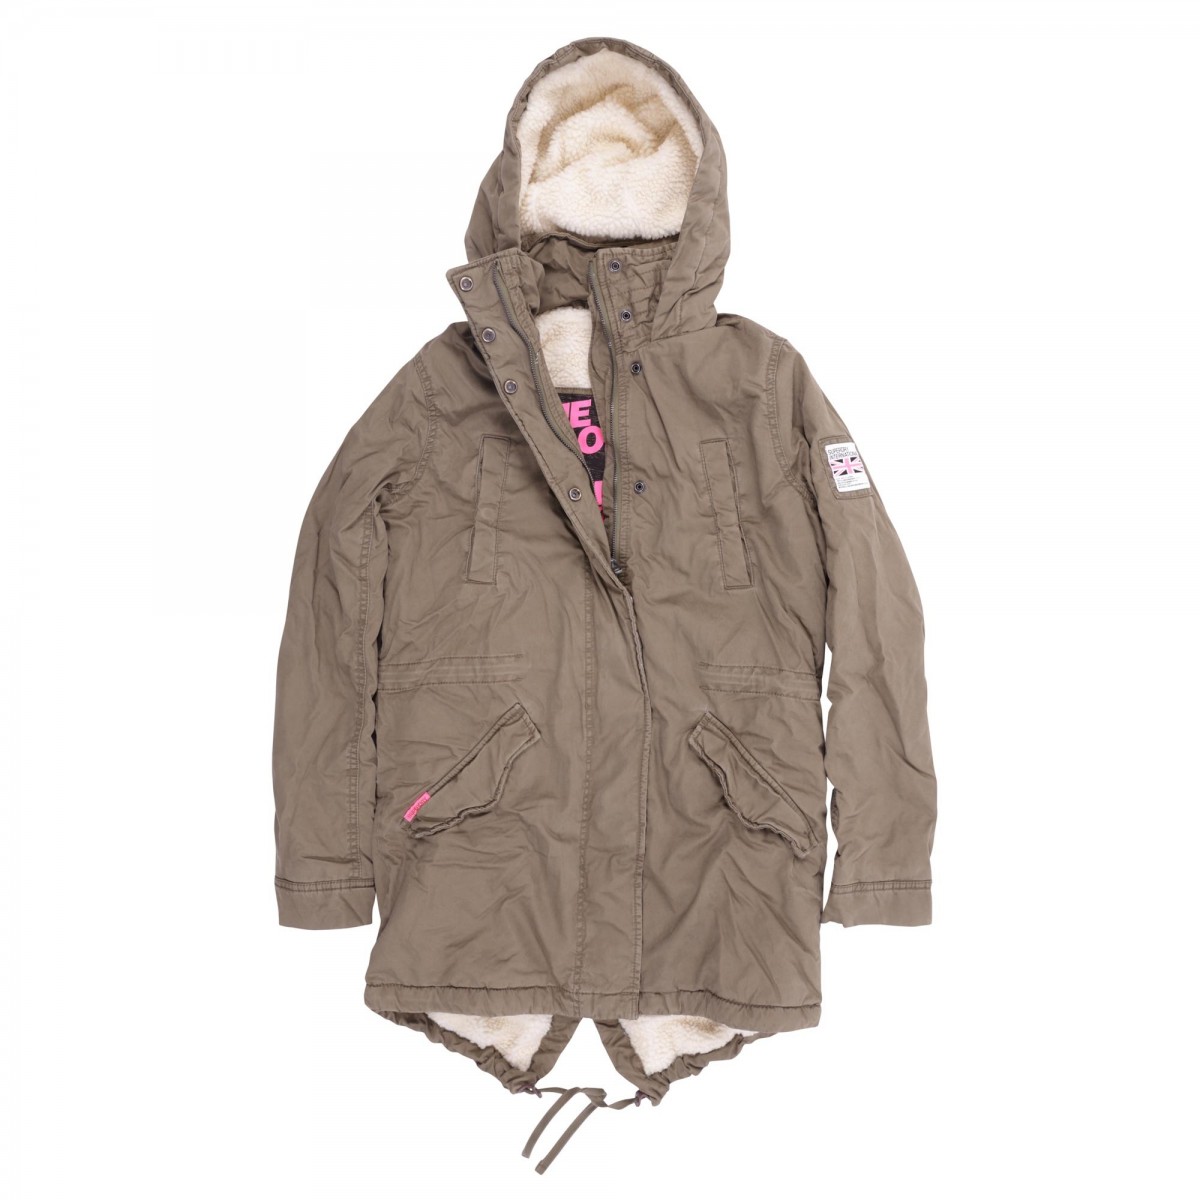 WINTER ROOKIE MILITARY PARKA